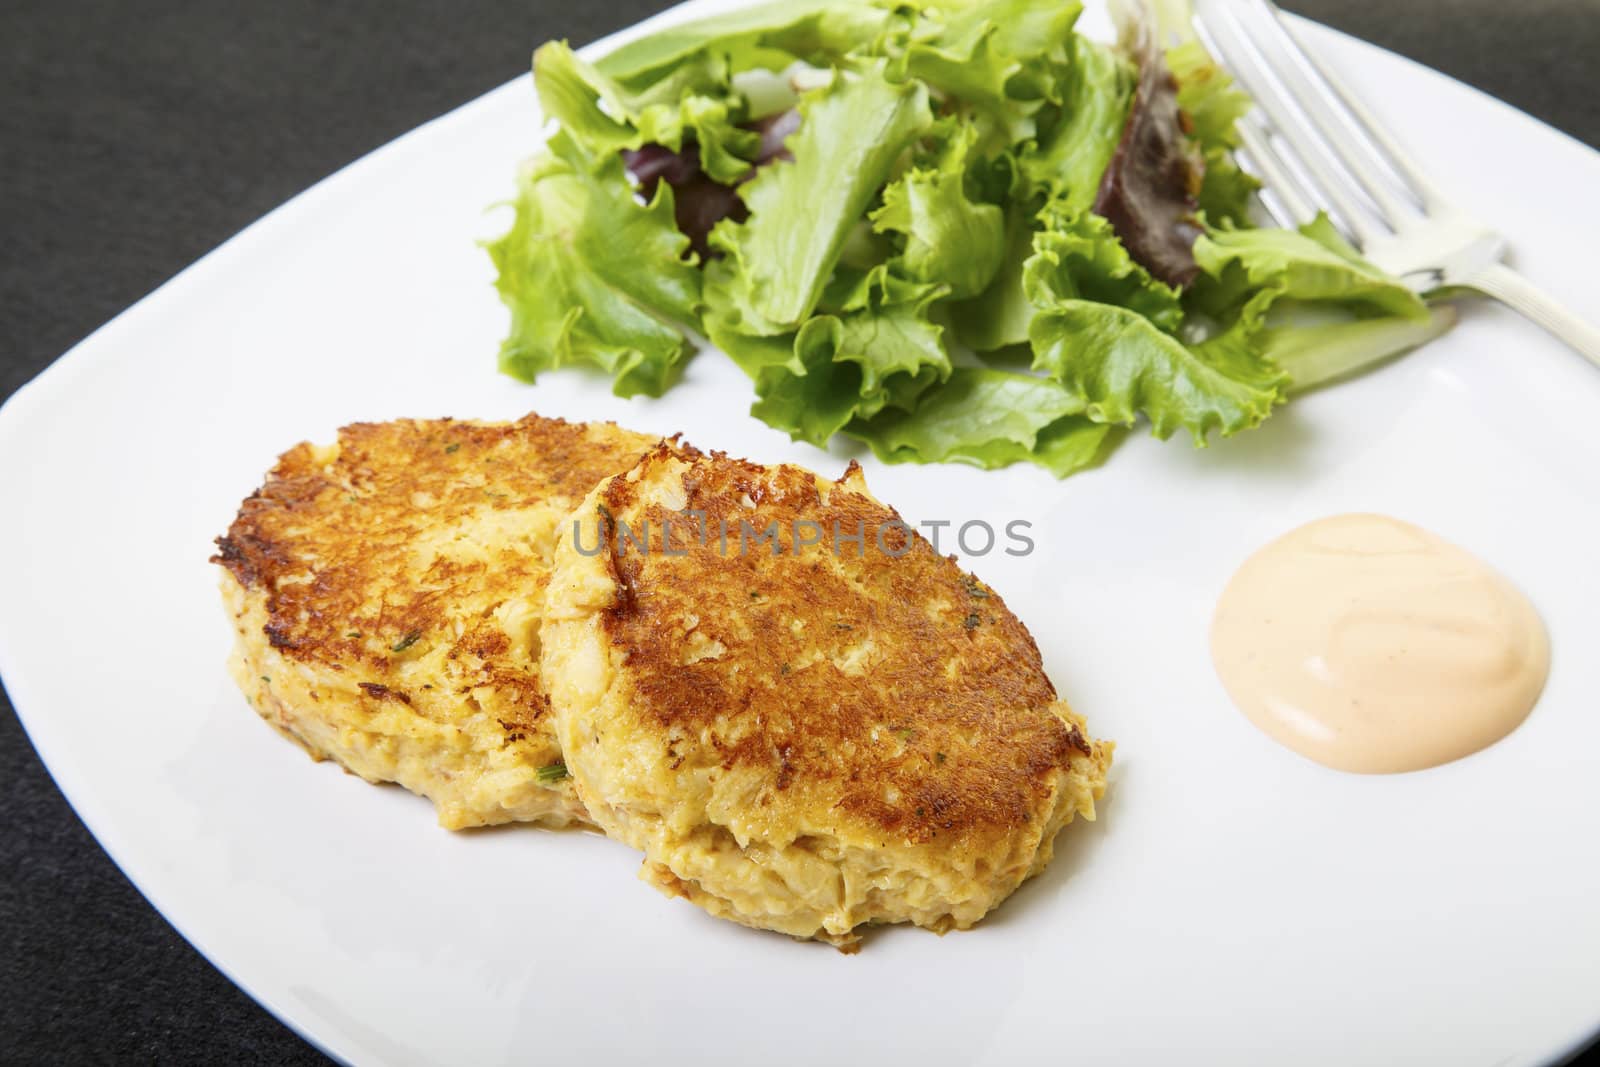 Crab Cakes and Salad by dbvirago